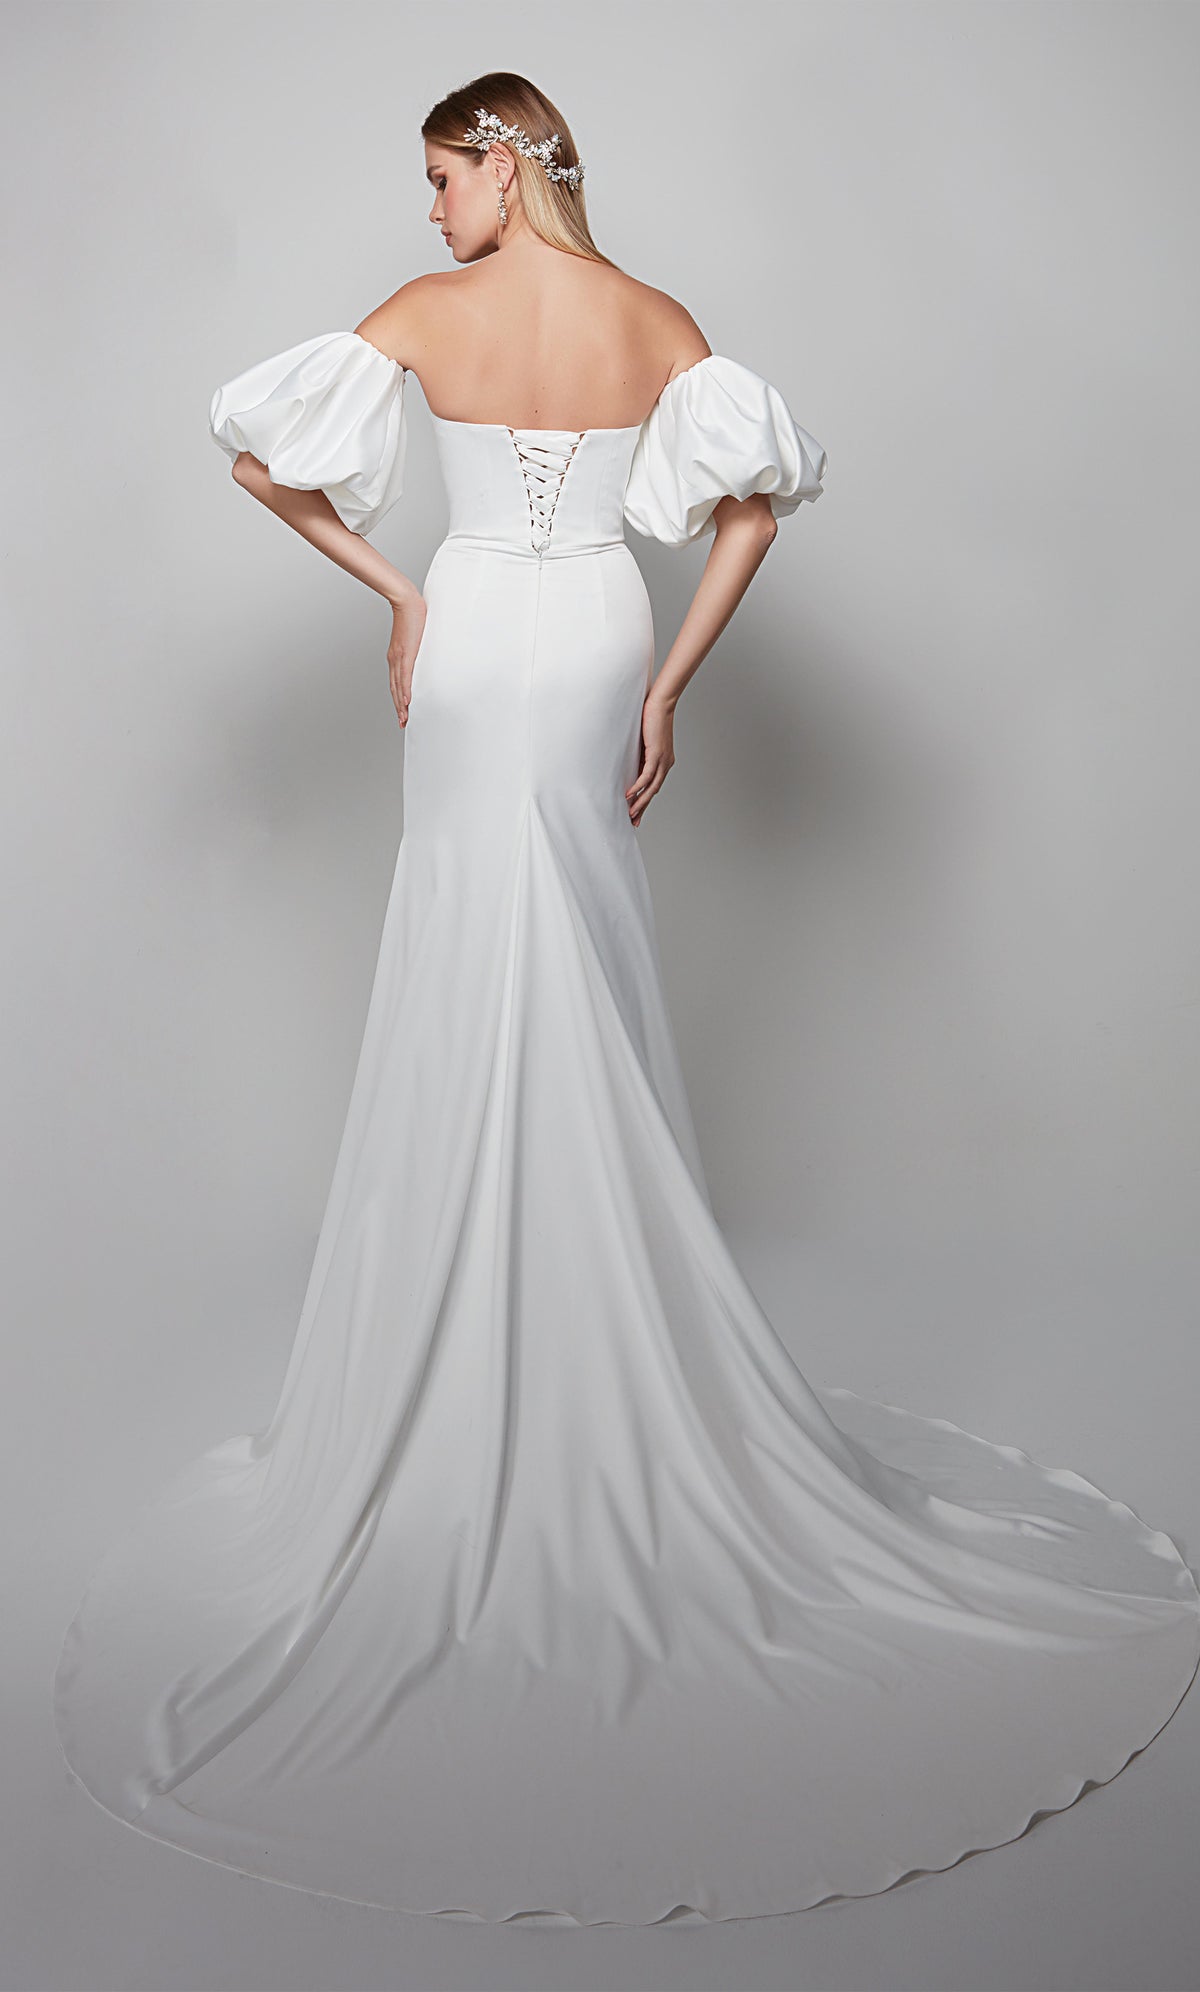 White satin wedding gown with a lace up back, removable puff sleeves, and train.